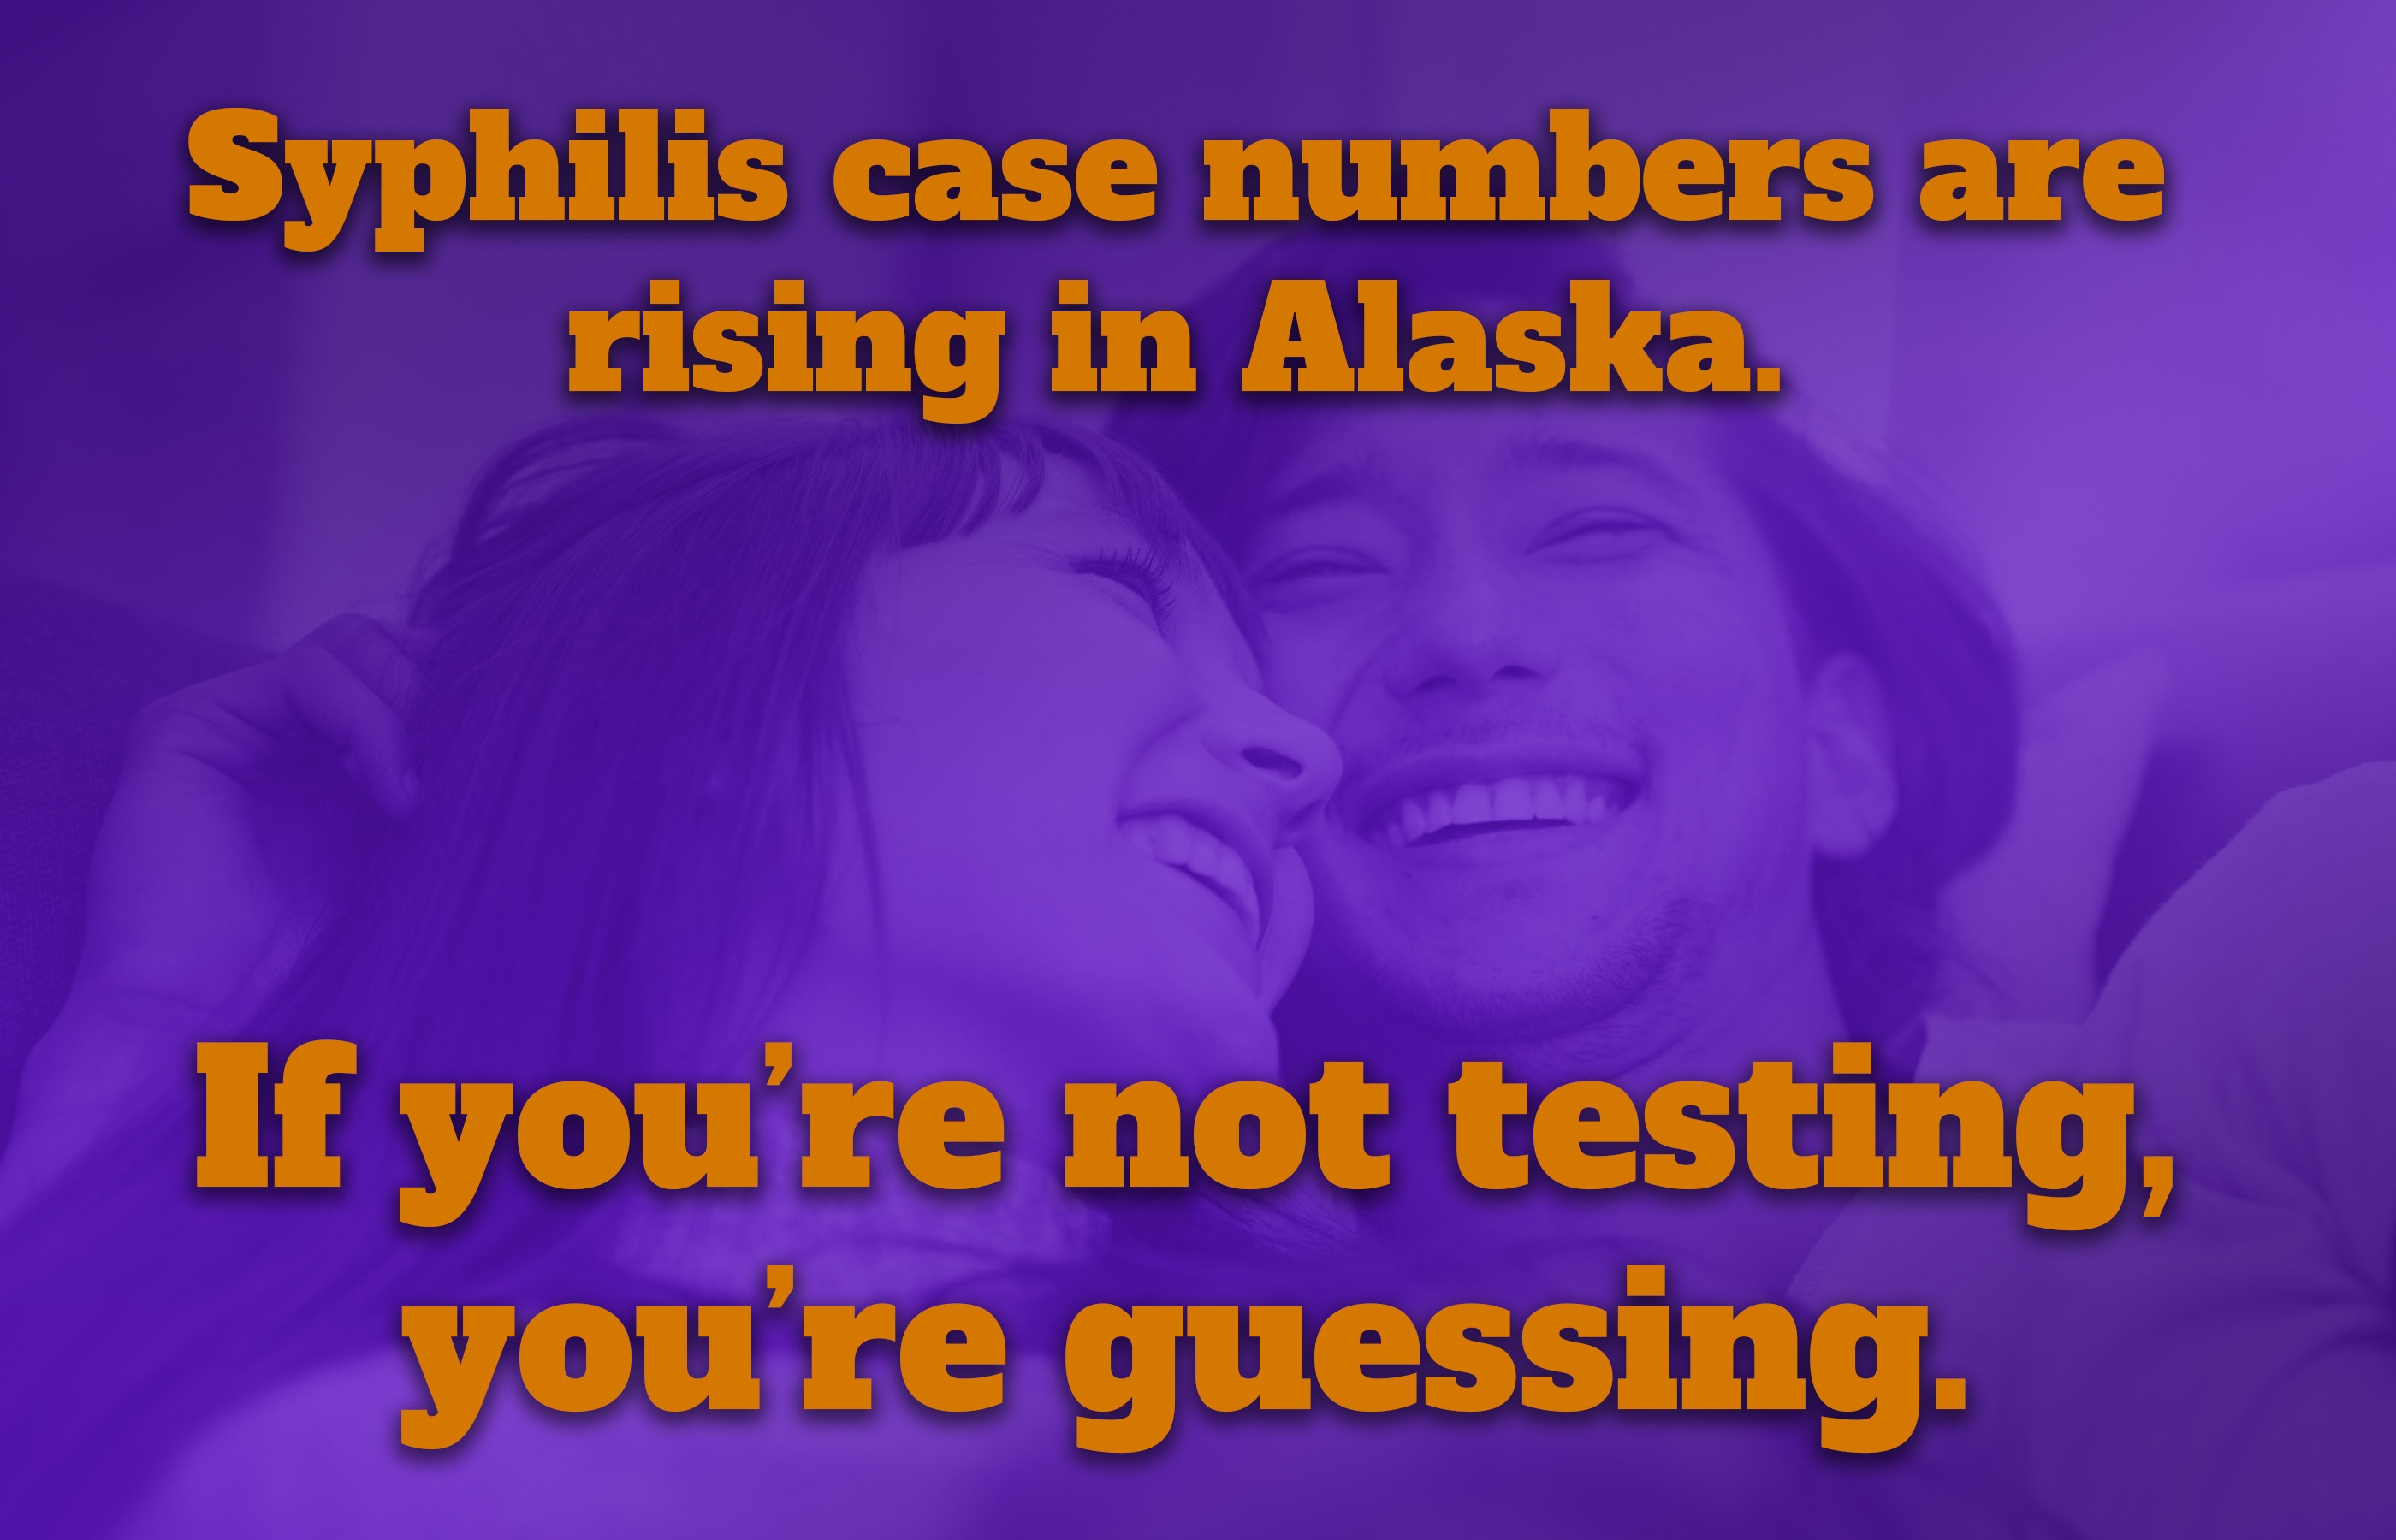 Syphilis case numbers are rising in Alaska. If you're not testing, you're guessing.